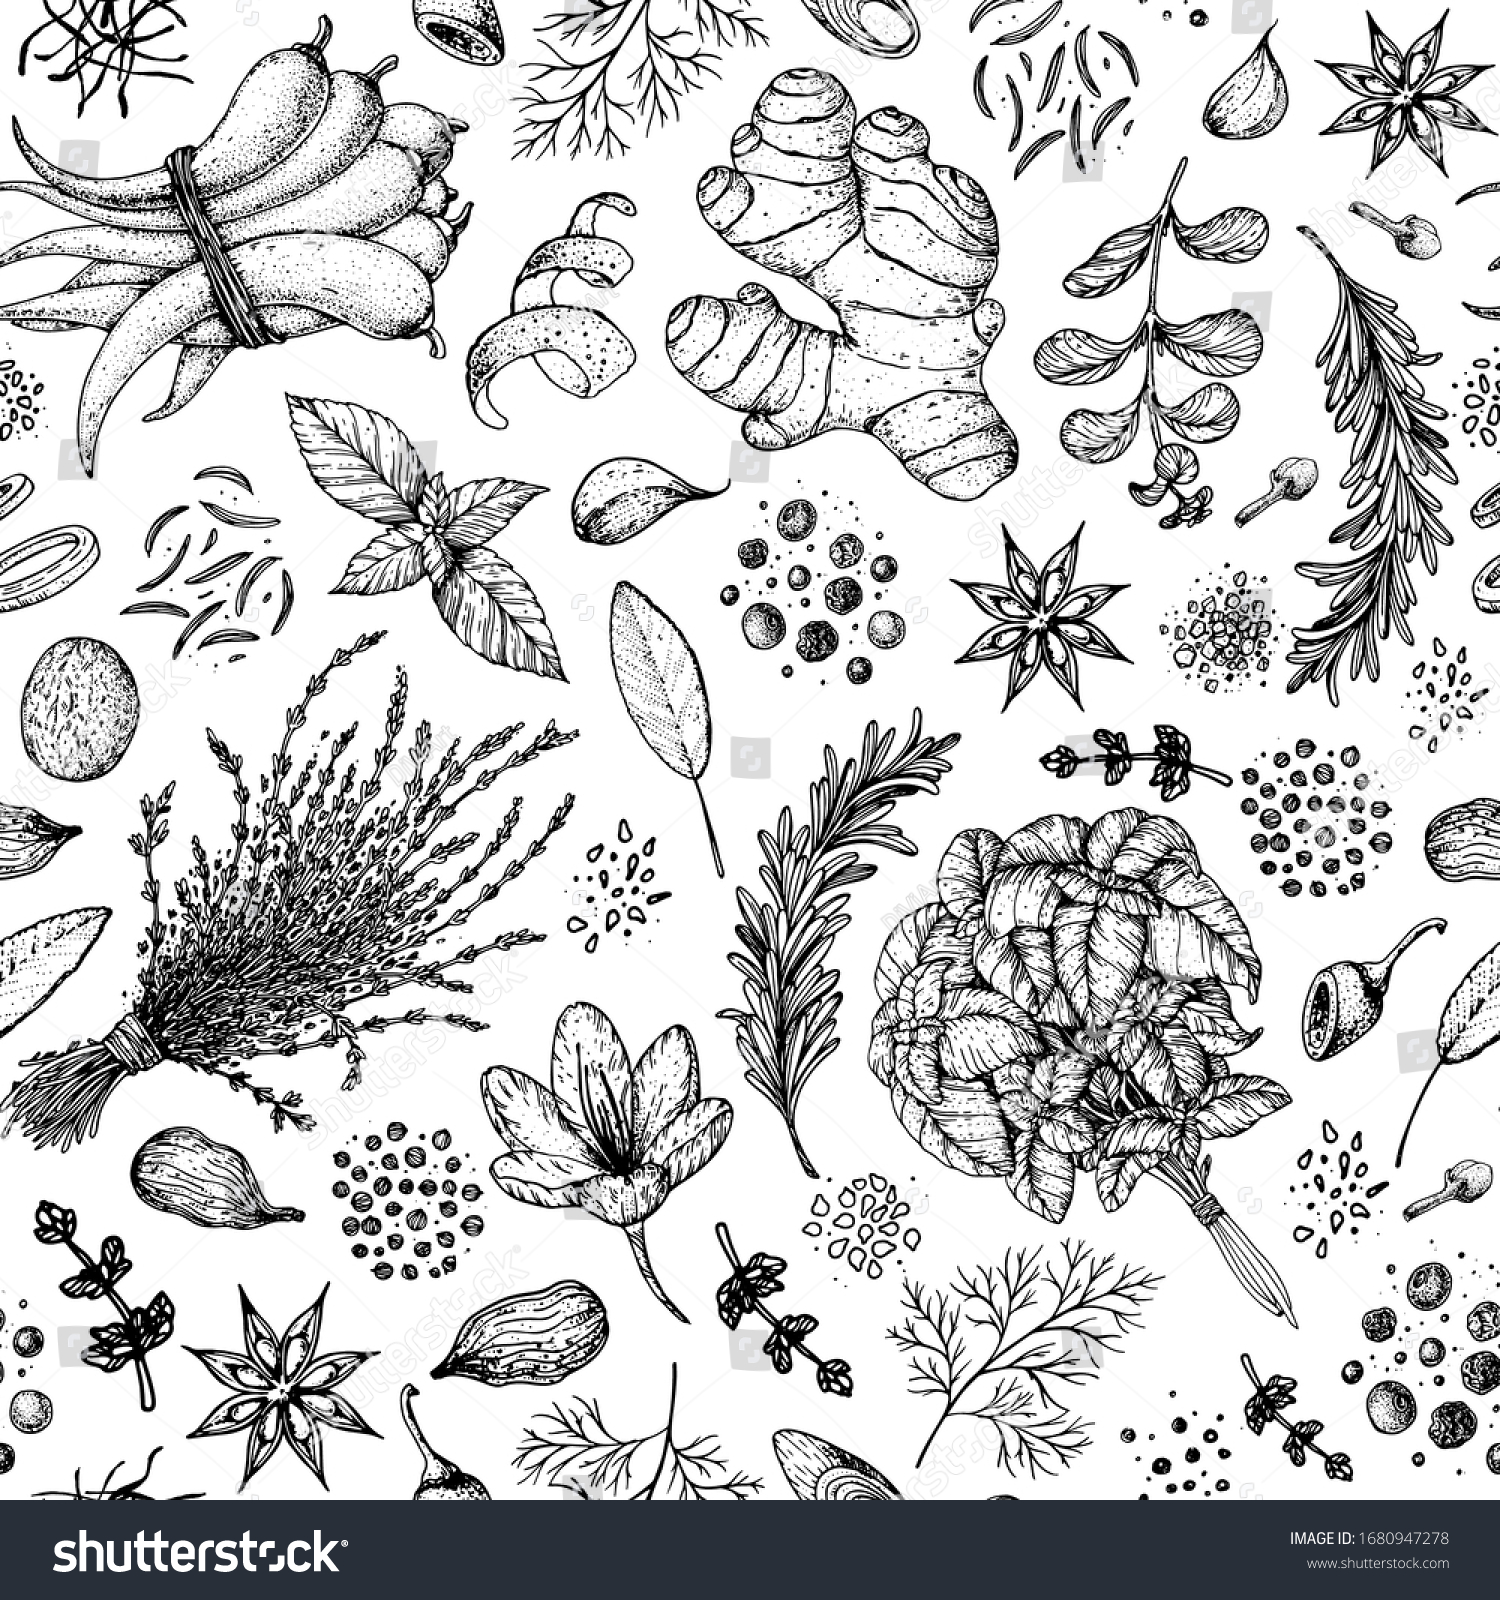 Herbs and spices seamless pattern. Hand drawn vector illustration. Sketch design. Engraved spice. Basil, garlic, cardamom, sage, rosemary, anise, pepper, marjoram, mint, thyme, ginger.  #1680947278